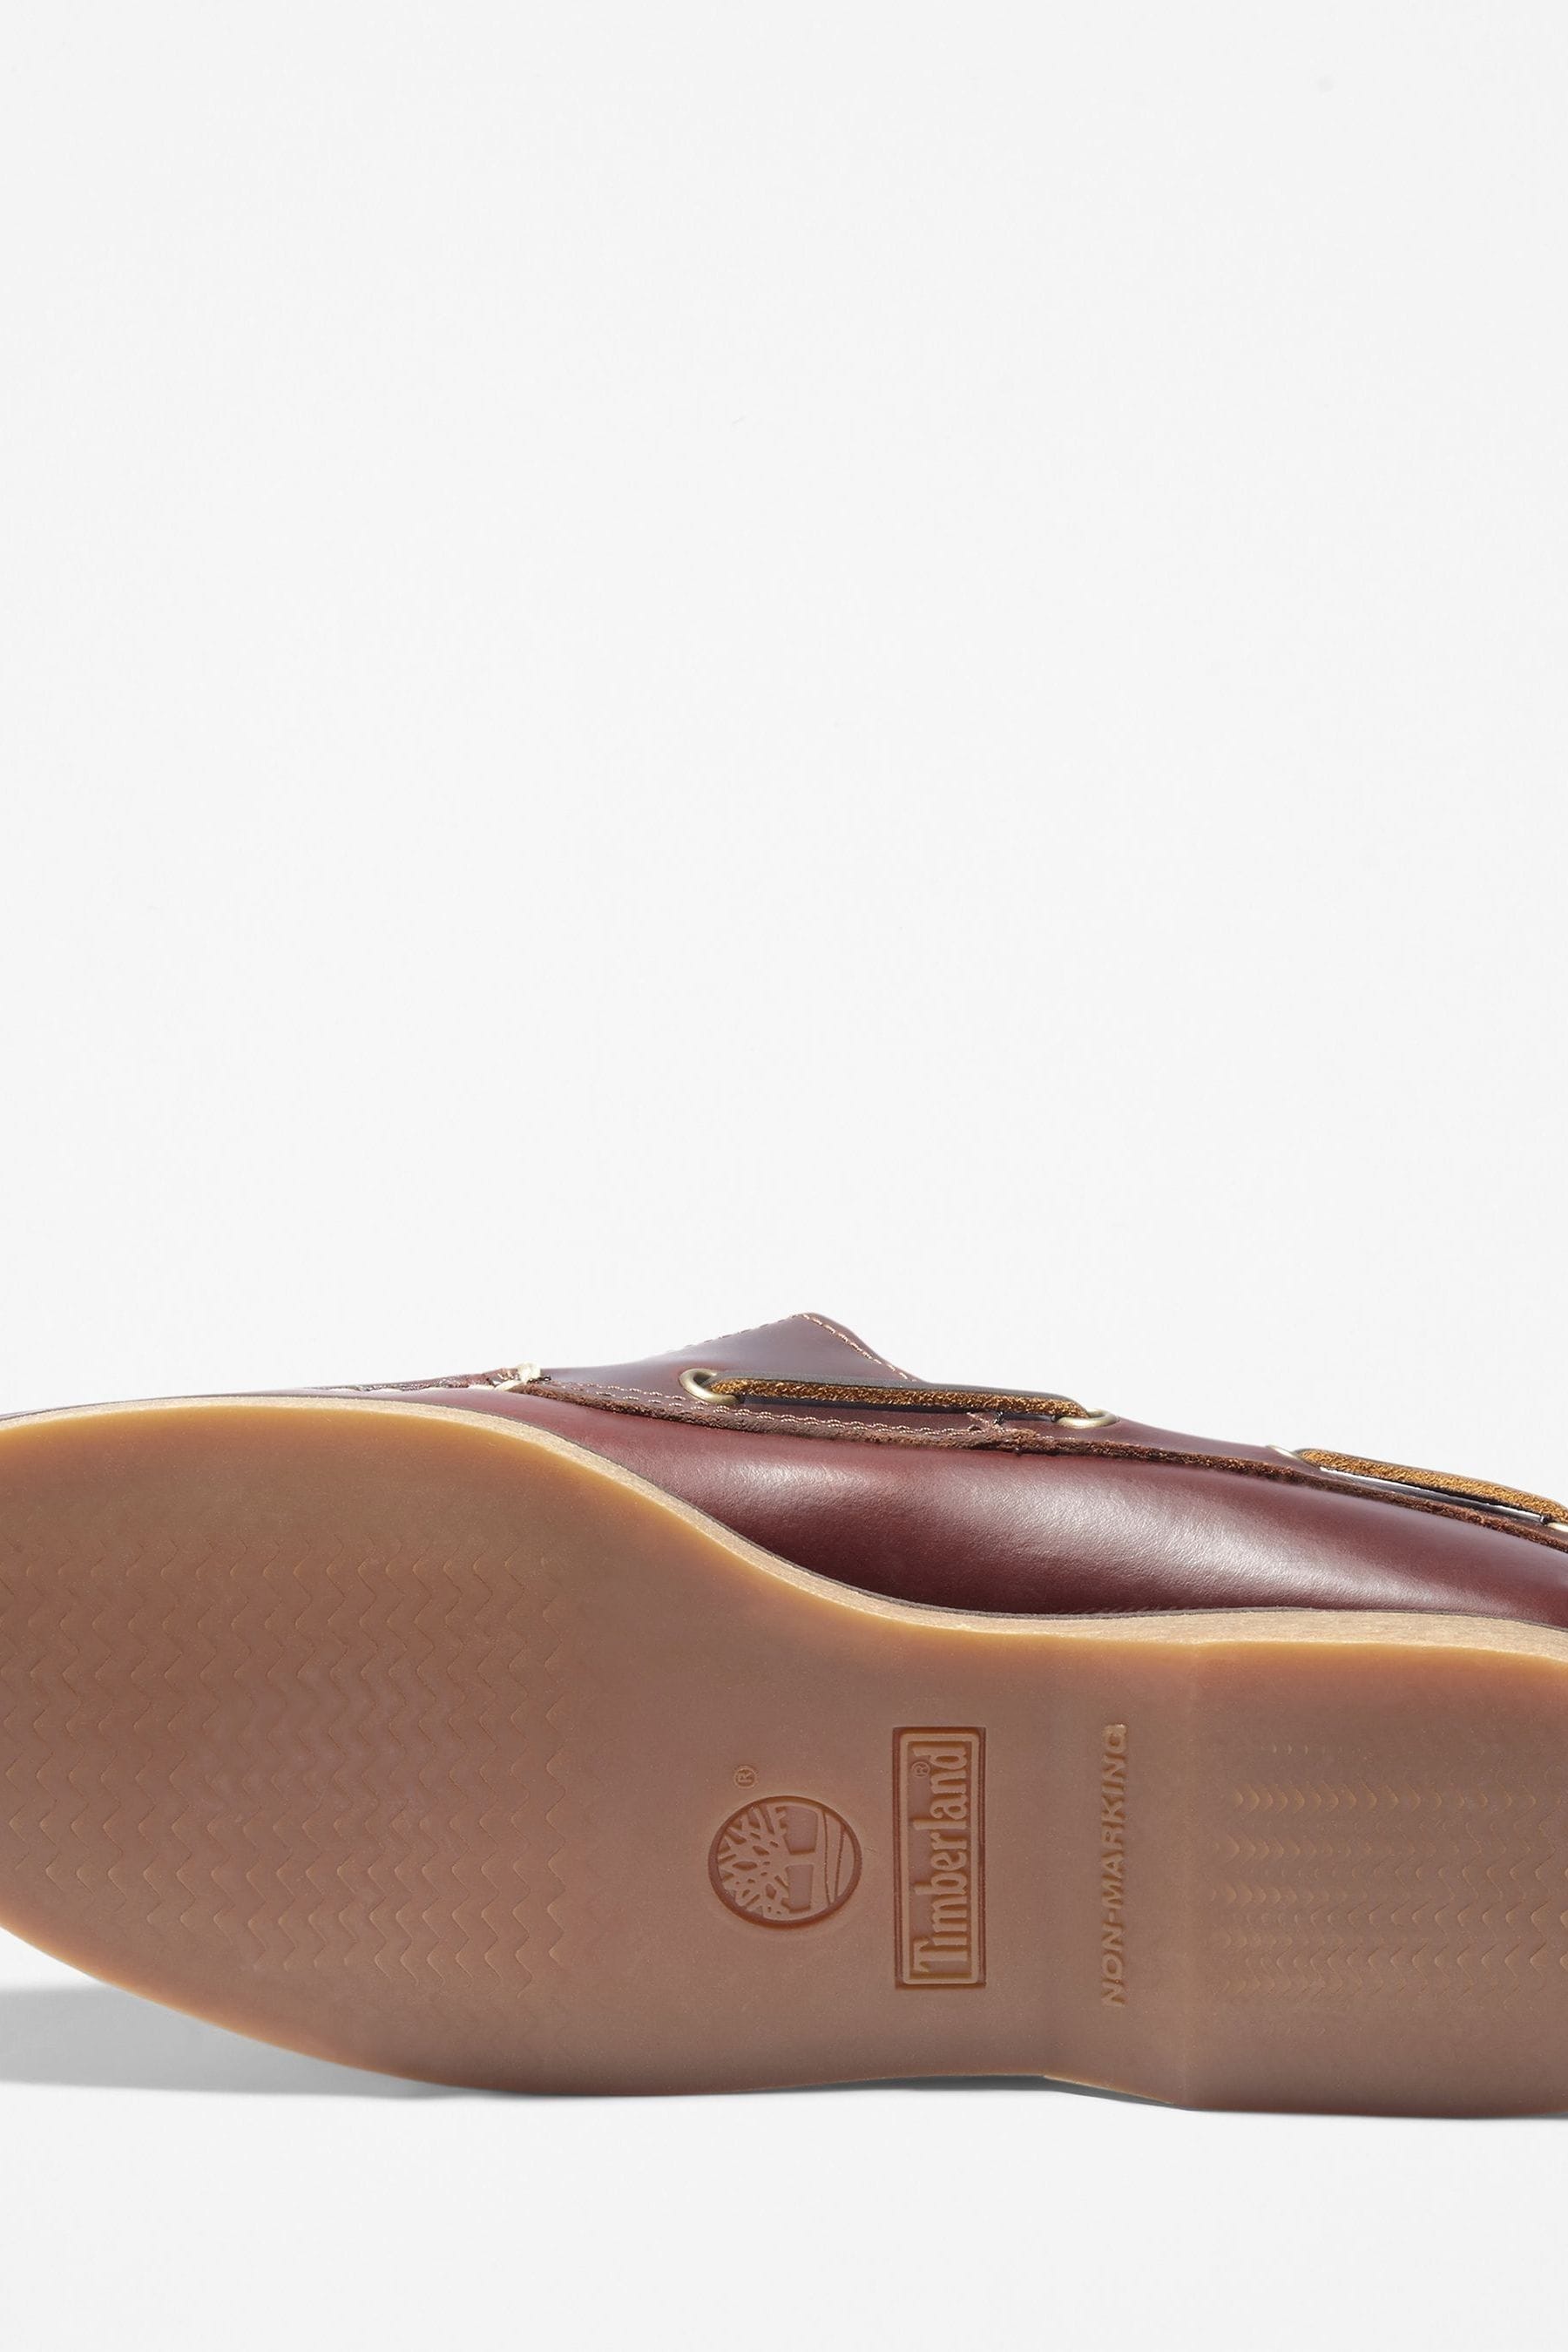 Buy Timberland® Rootbeer Brown 2 Eyelet Boat Shoe from the Next UK ...